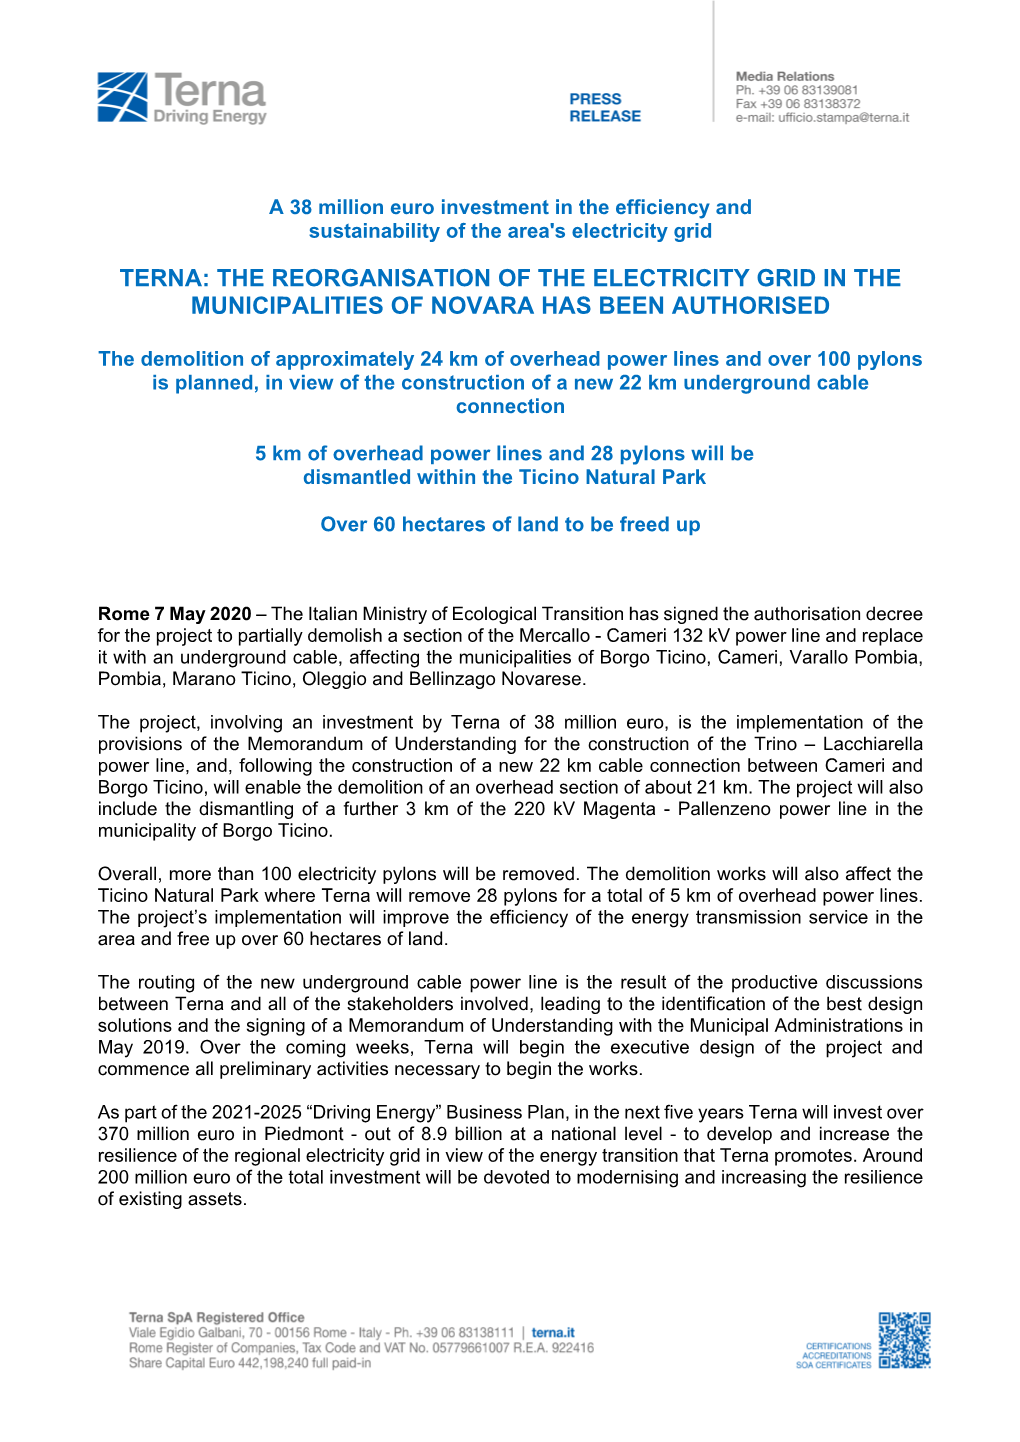 Terna: the Reorganisation of the Electricity Grid in the Municipalities of Novara Has Been Authorised